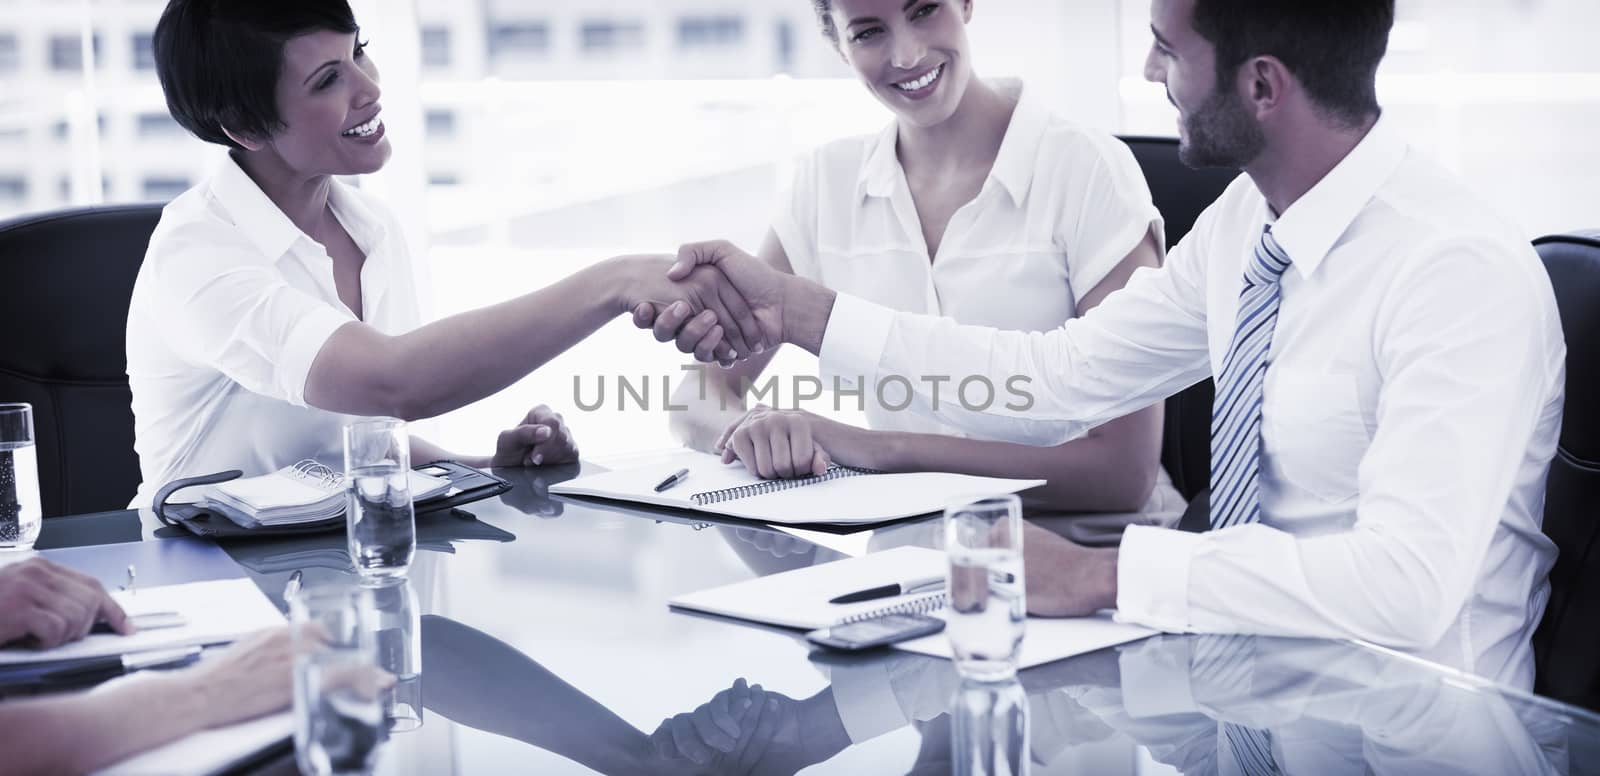 Executives shaking hands after a business meeting by Wavebreakmedia